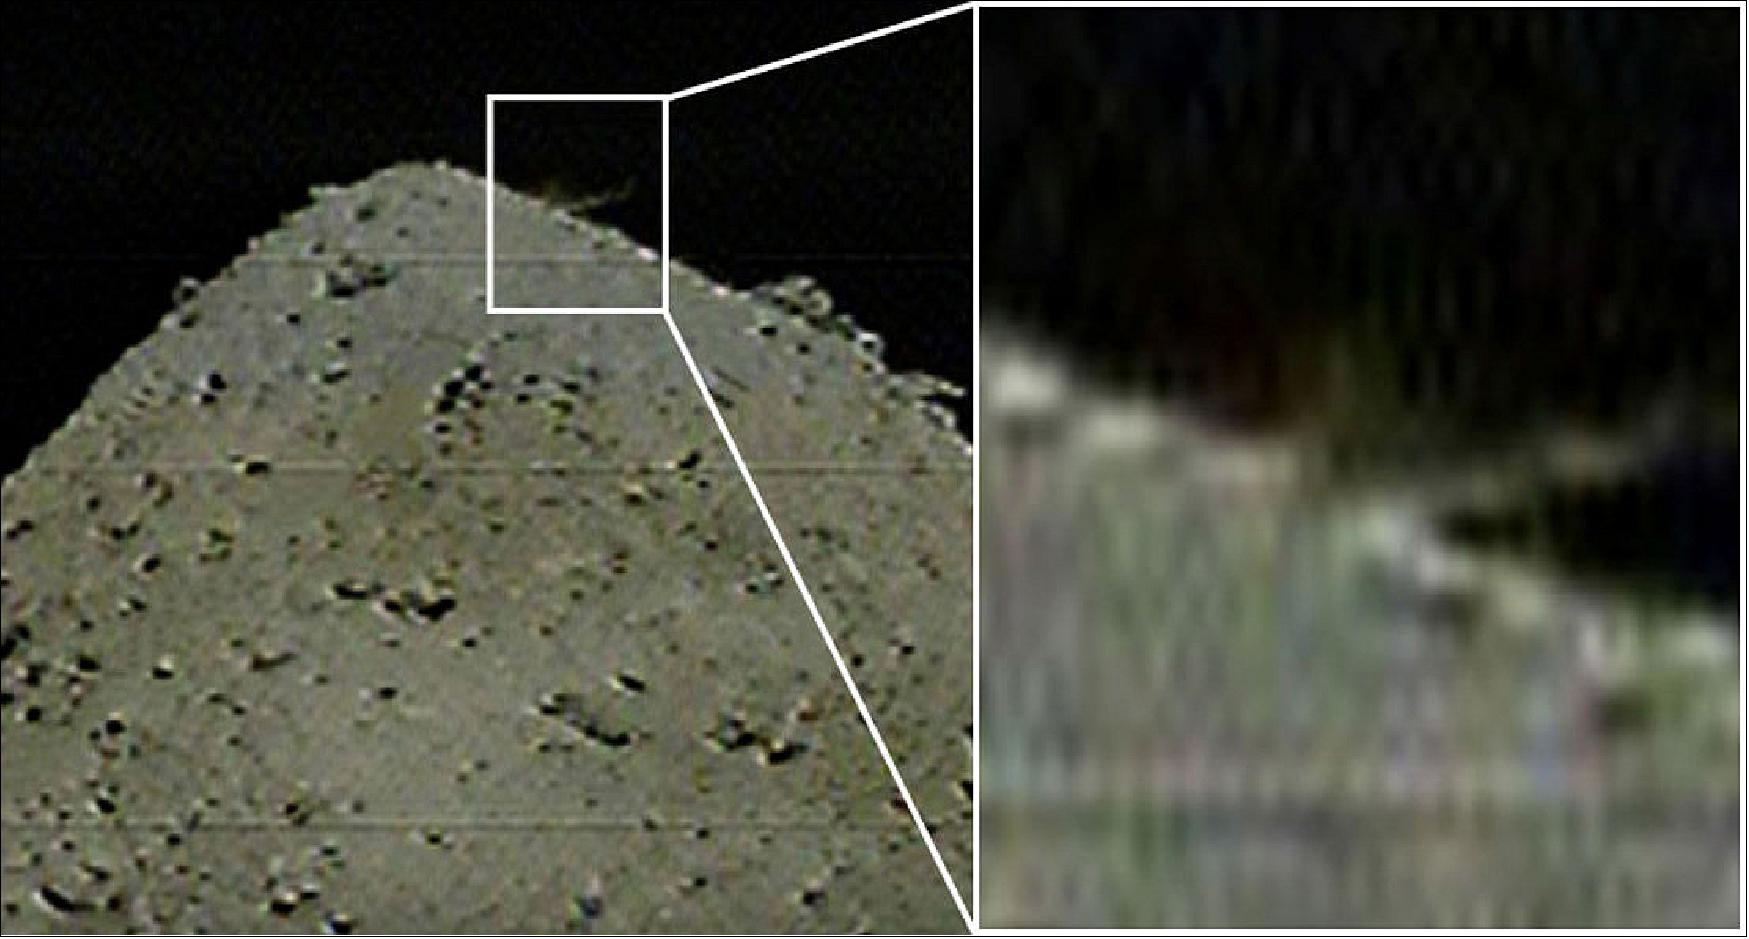 Figure 59: Plume from impact. This image, captured by the camera separated from Hayabusa2 (DCAM3), shows ejection from Ryugu’s surface, which was caused by the collision of the SCI against Ryugu. The image was taken at 11:36 a.m. JST on April 5, 2019 (image credit: JAXA/The University of Tokyo/Kochi University/Rikkyo University/Nagoya University/Chiba Institute of Technology/Meiji University/The University of Aizu/AIS)